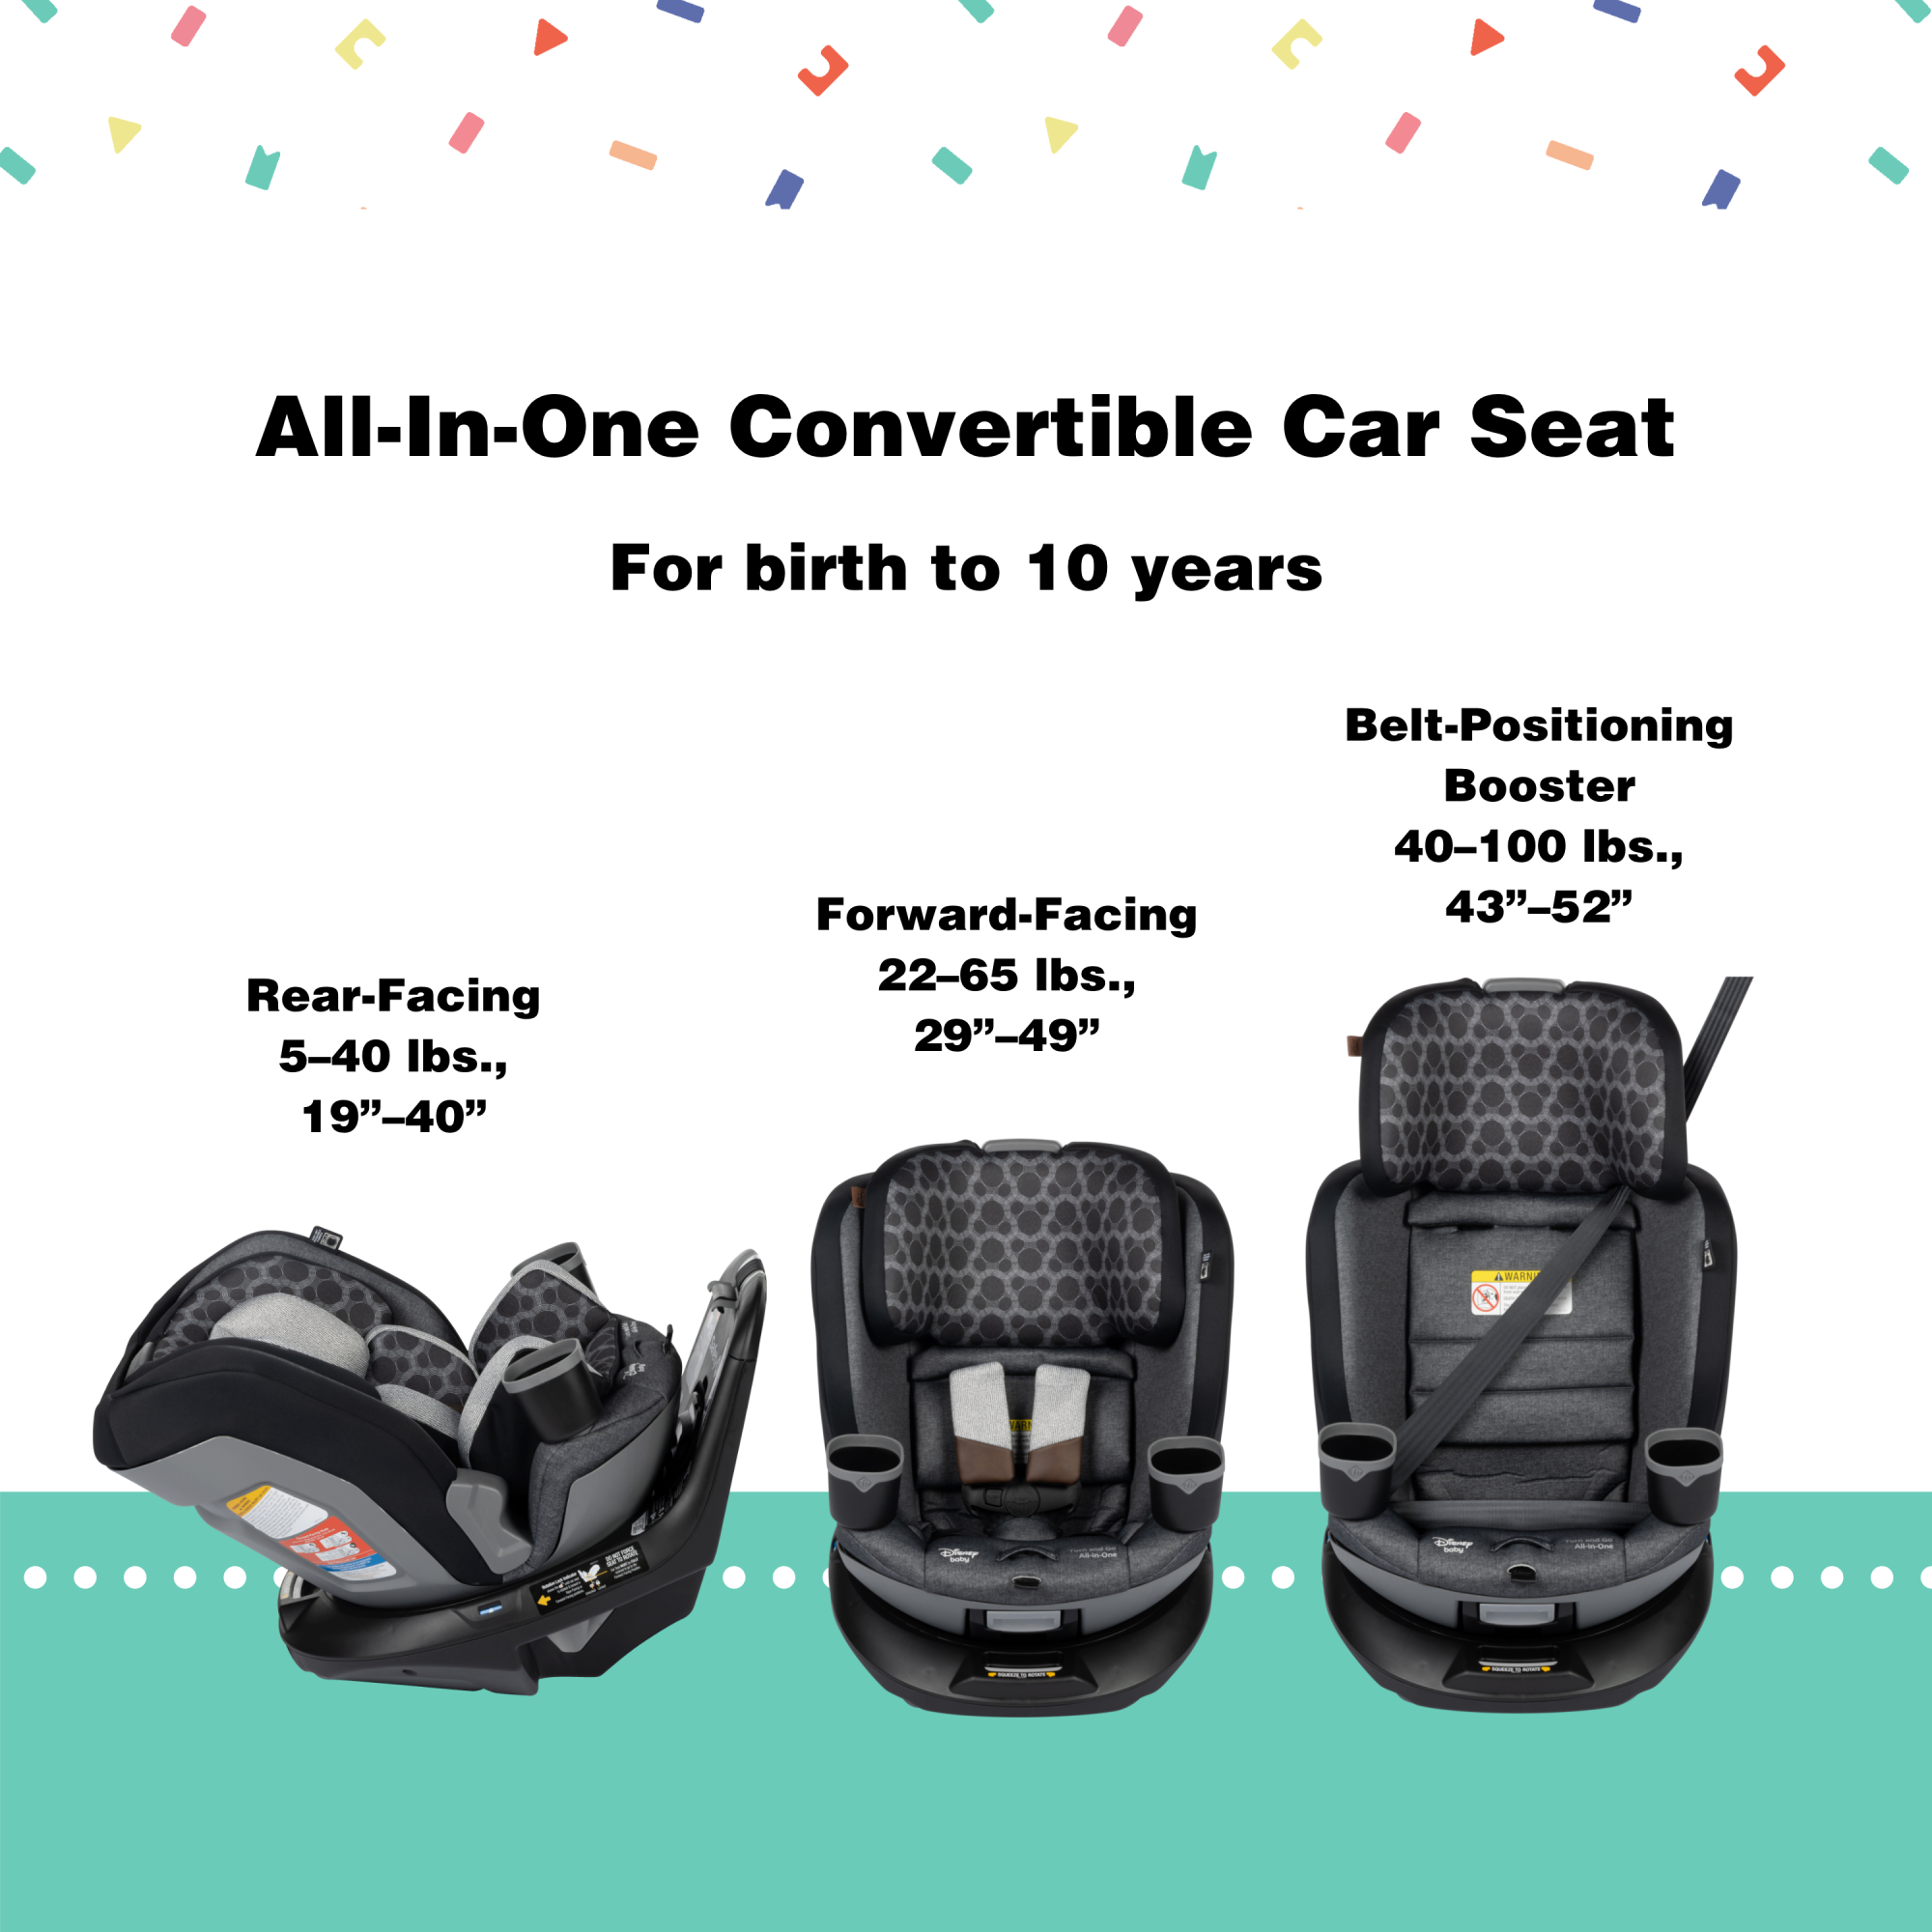 Disney Baby Turn and Go 360 Rotating All-in-One Convertible Car Seat - all-in-on convertible car seat for birth to 10 years: rear-facing 5-40 lbs., 19"-40"; forward-facing 22-65 lbs., 29"-49"; belt-positioning booster 40-100 lbs., 43"-52"